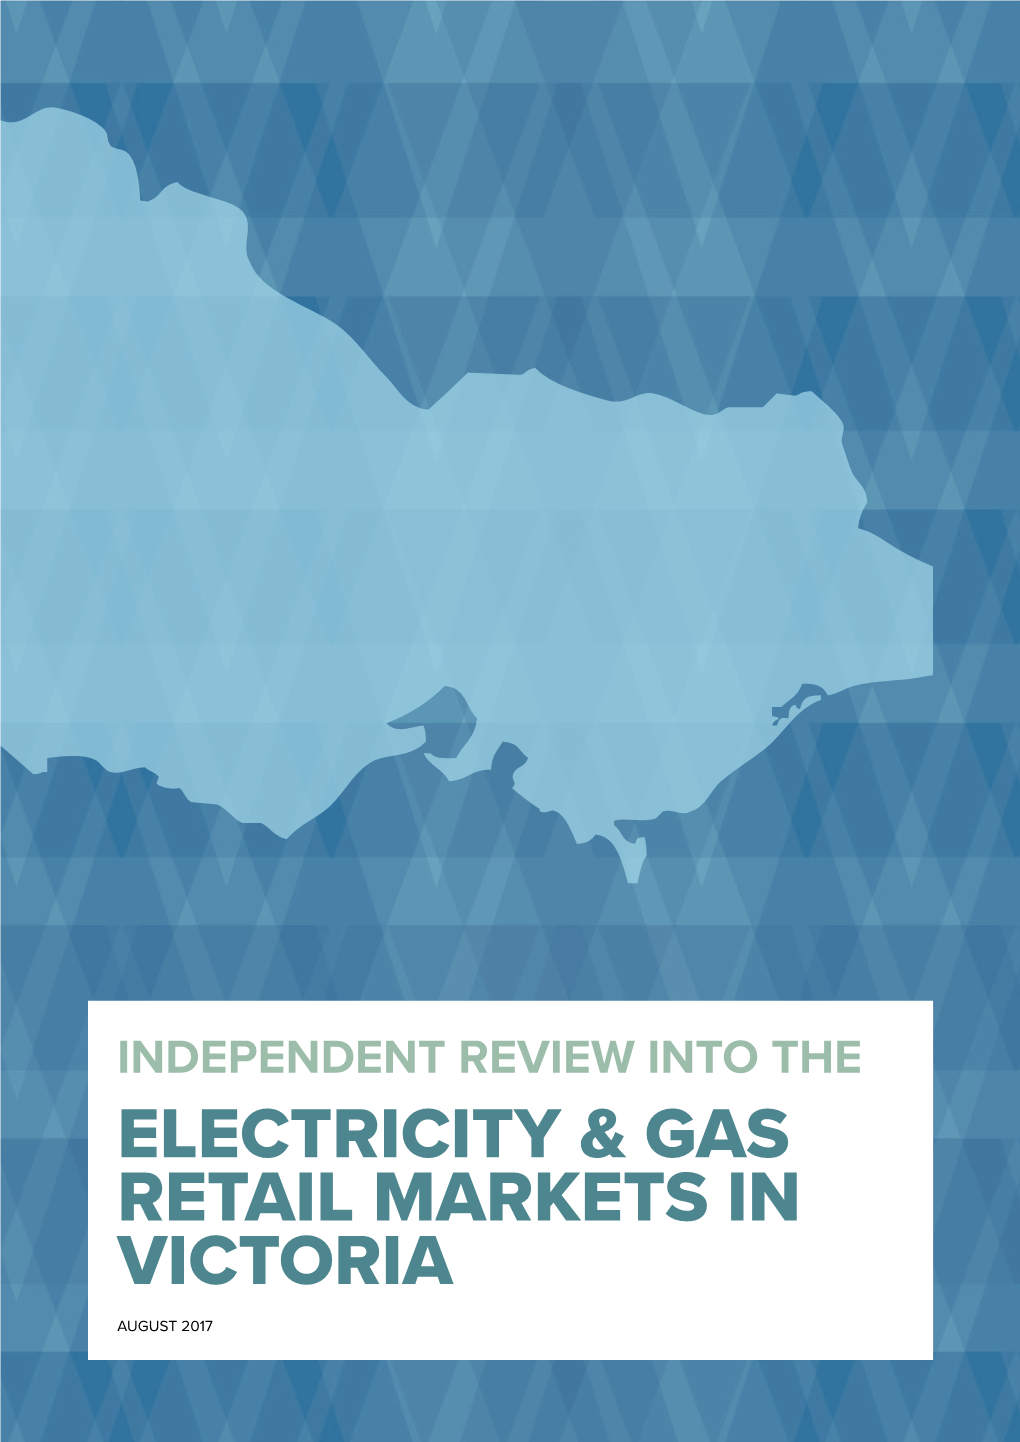 Electricity & Gas Retail Markets in Victoria